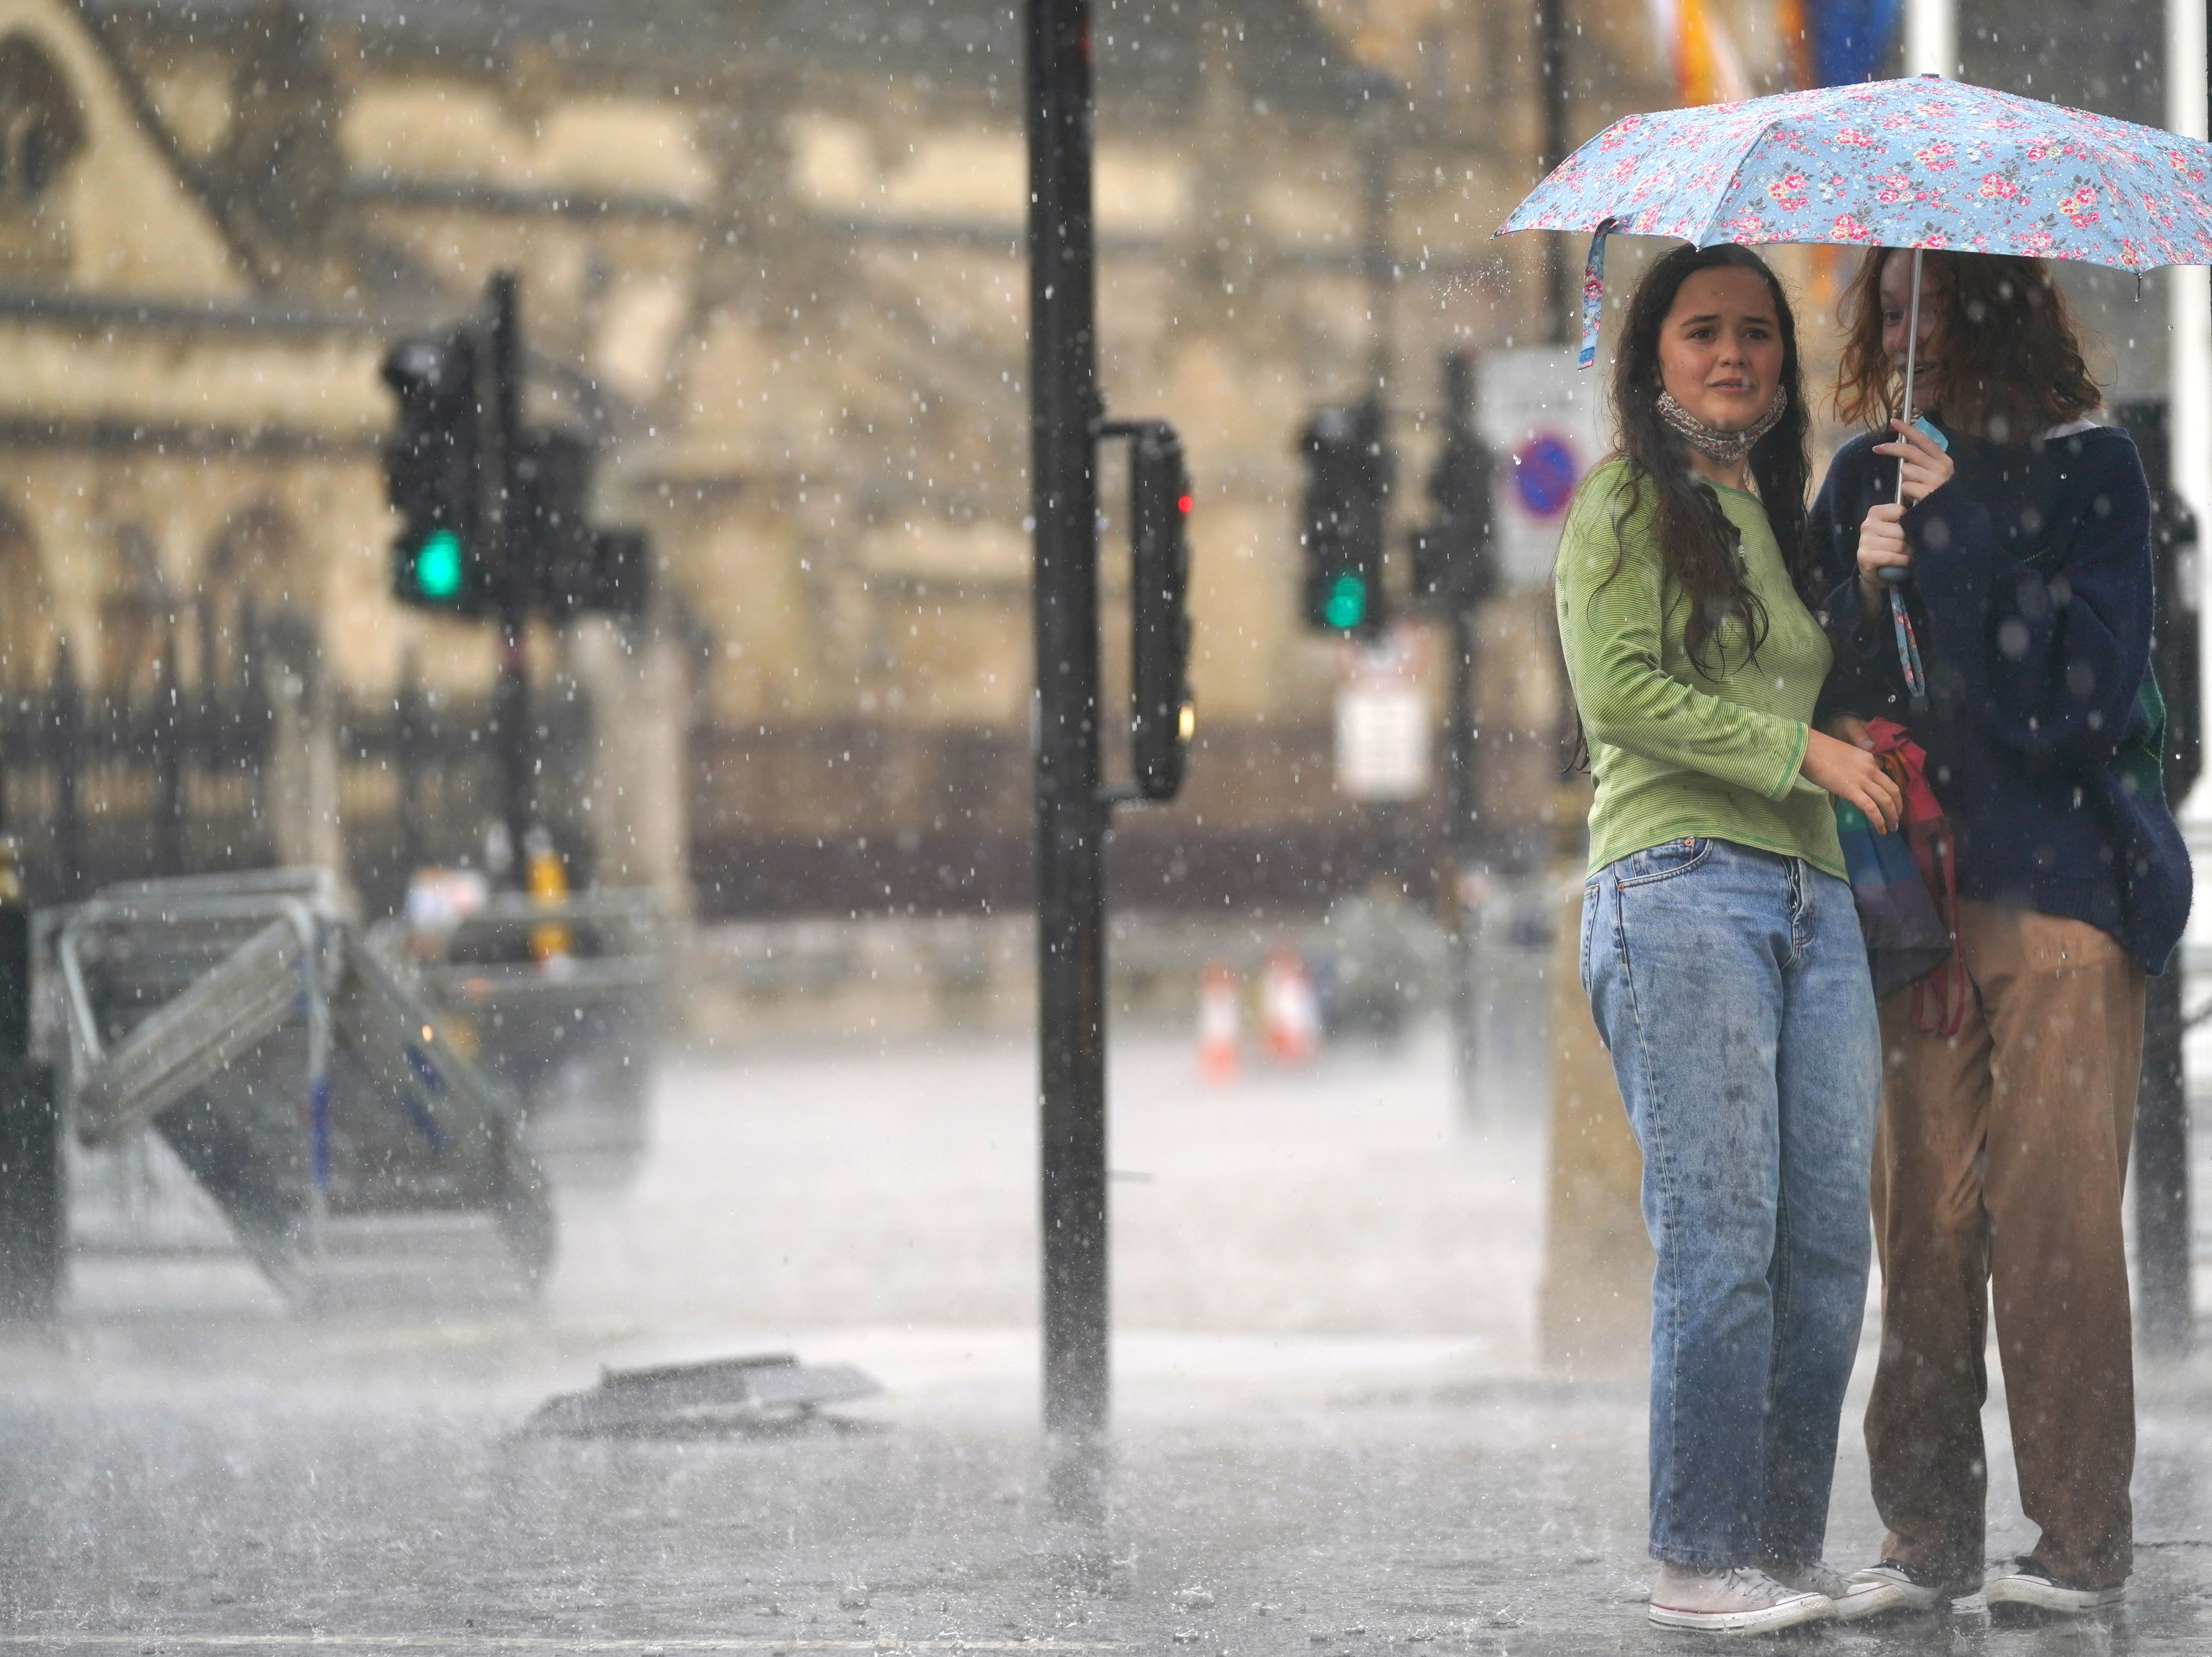 Torrential rain hammered London on Sunday, causing serious flooding in many places